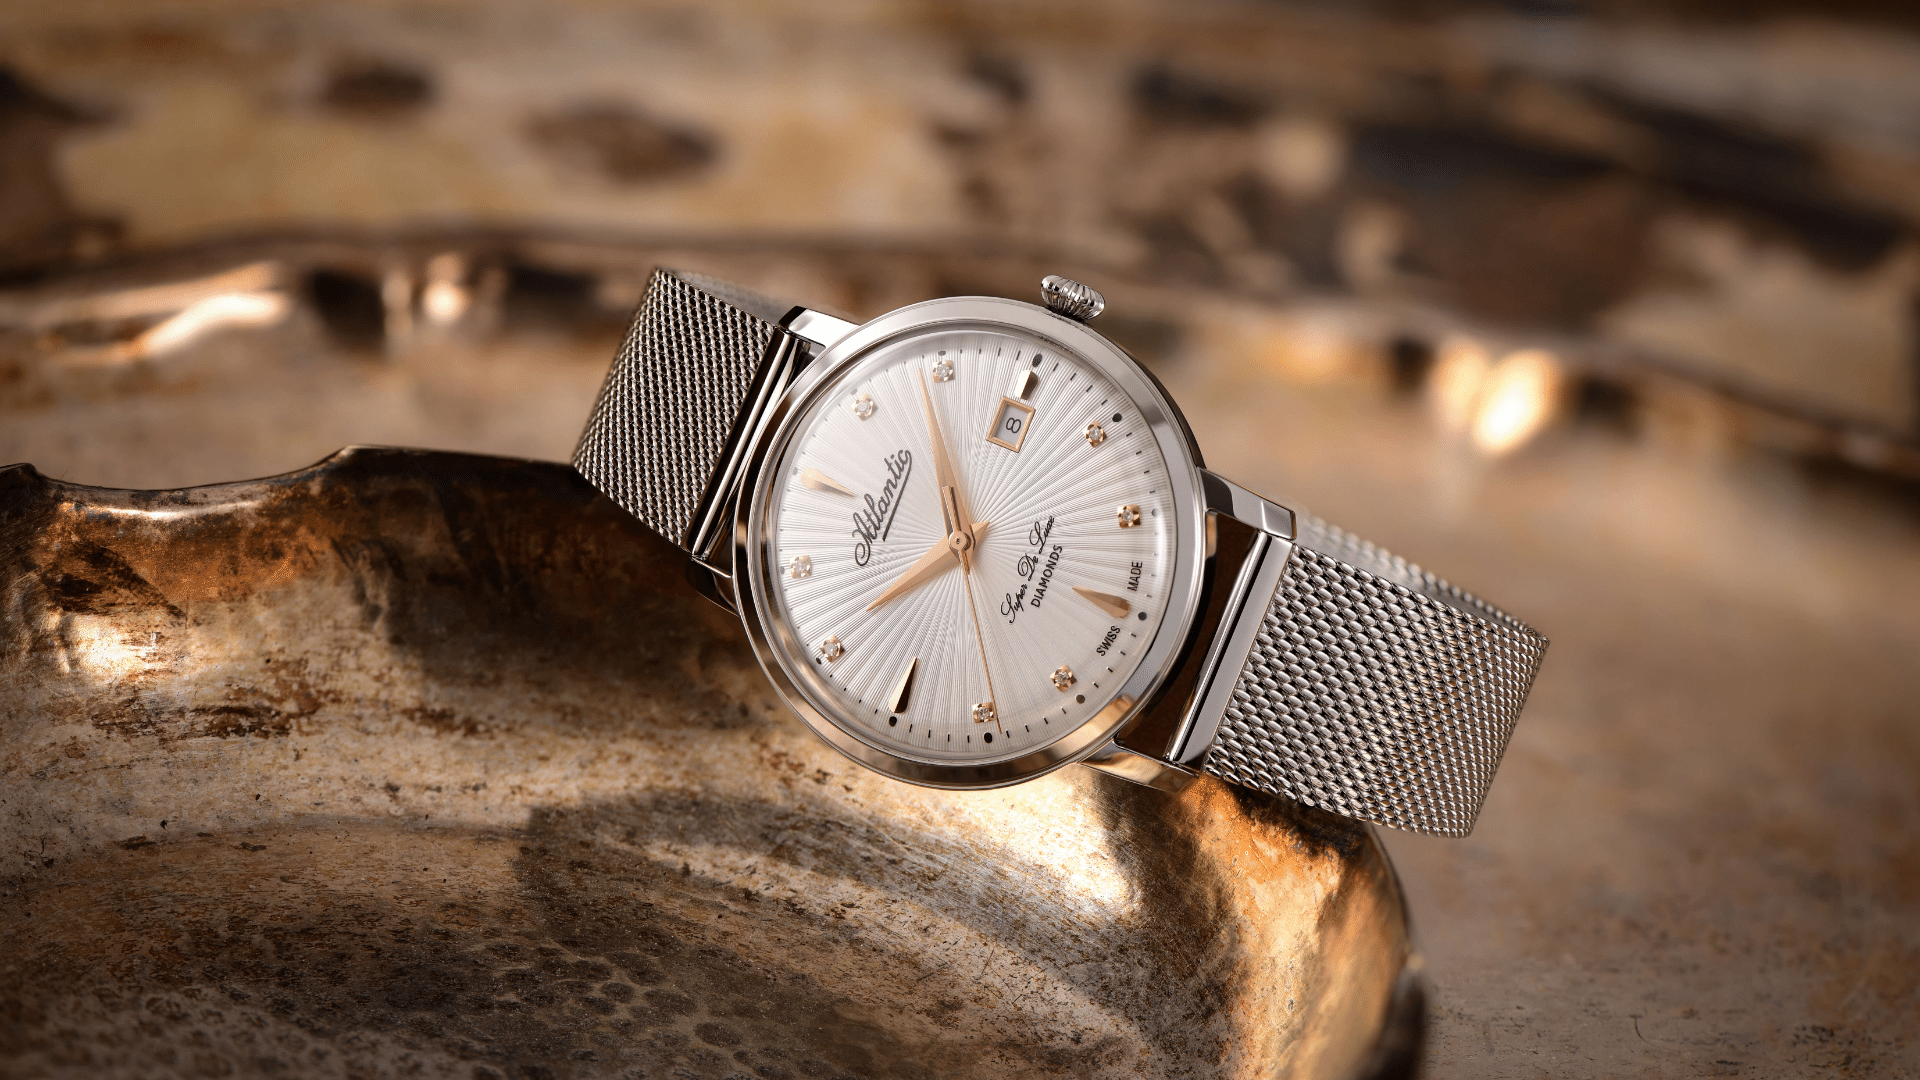 What are some watch brands on par with Longines? - Quora